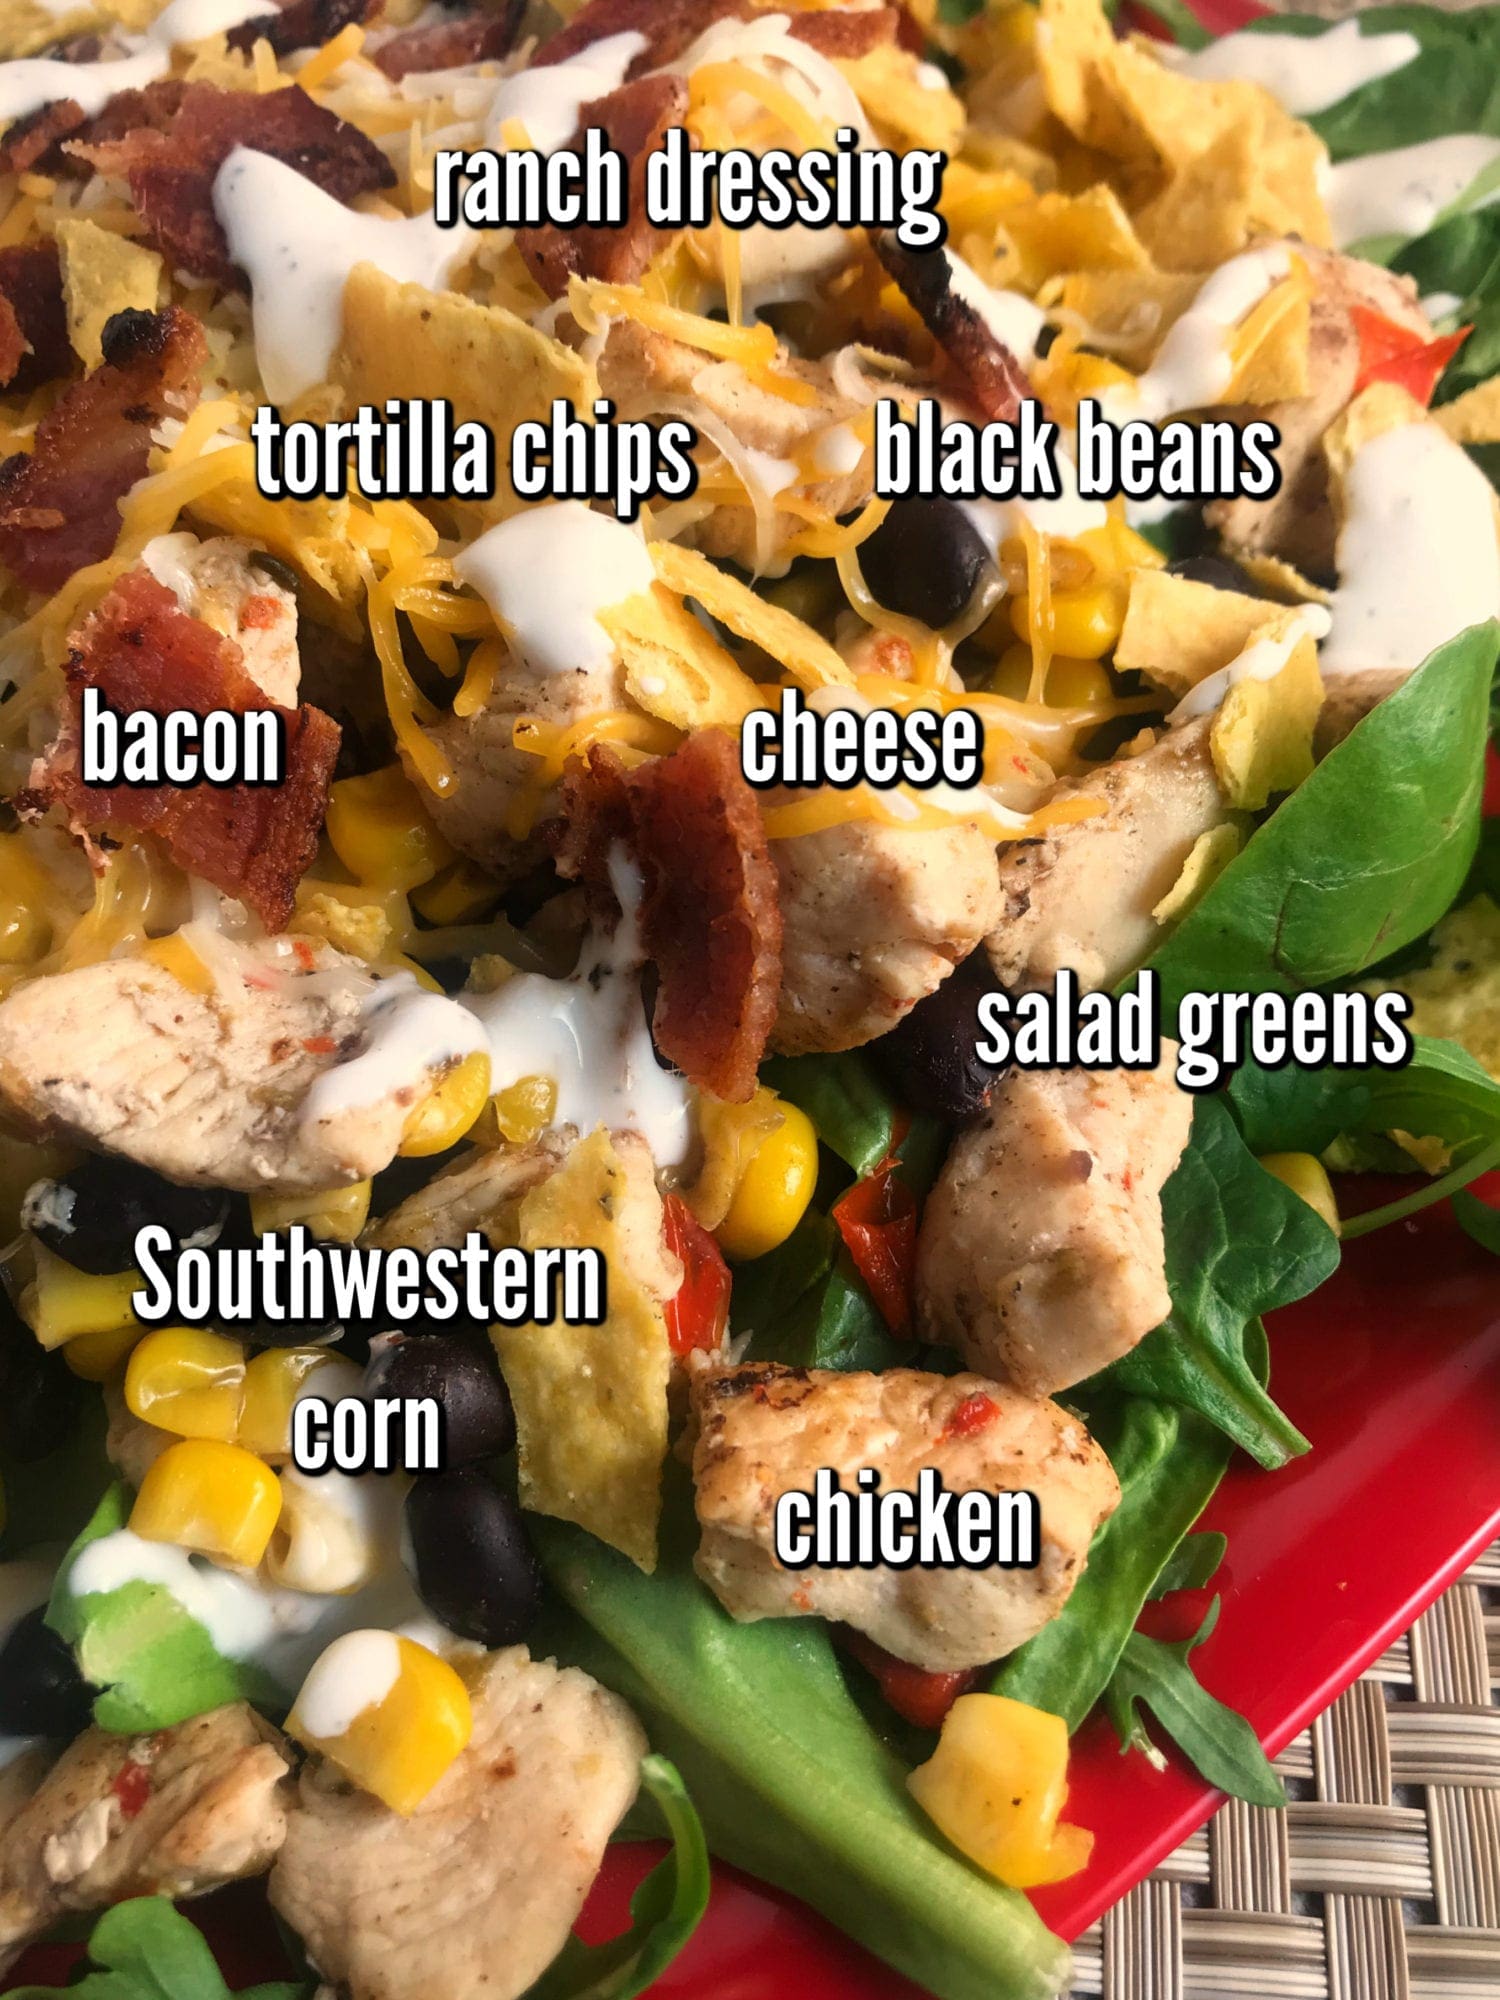 Ingredients to make a delicious Southwest Chicken Bacon and Ranch Salad: salad greens, chicken, bacon, cheese, Southwest corn, black beans, tortilla chips, and Ranch dressing.